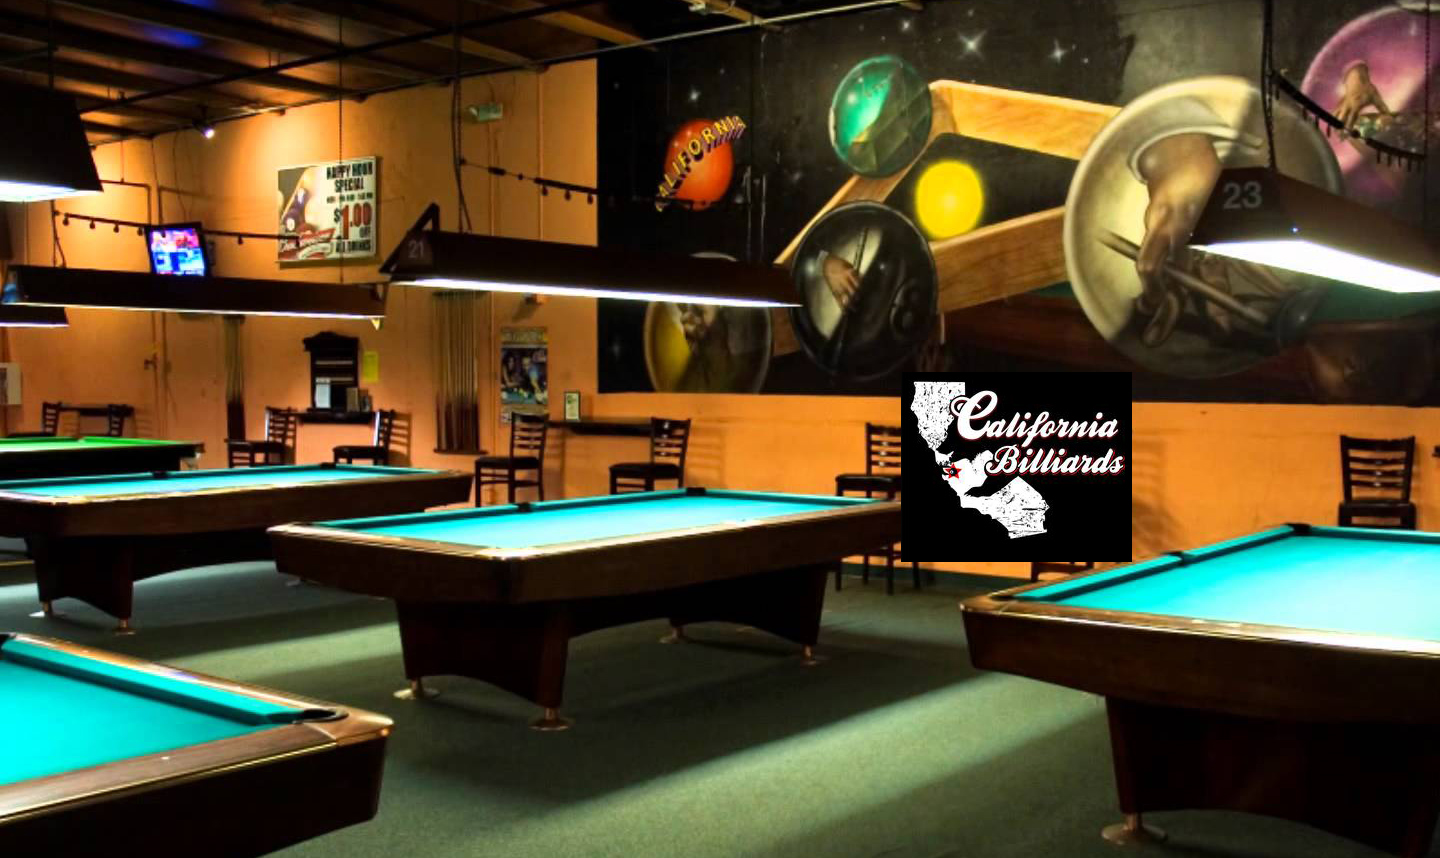 It's official! 3rd Annual Member's Tourney @ California Billiards!